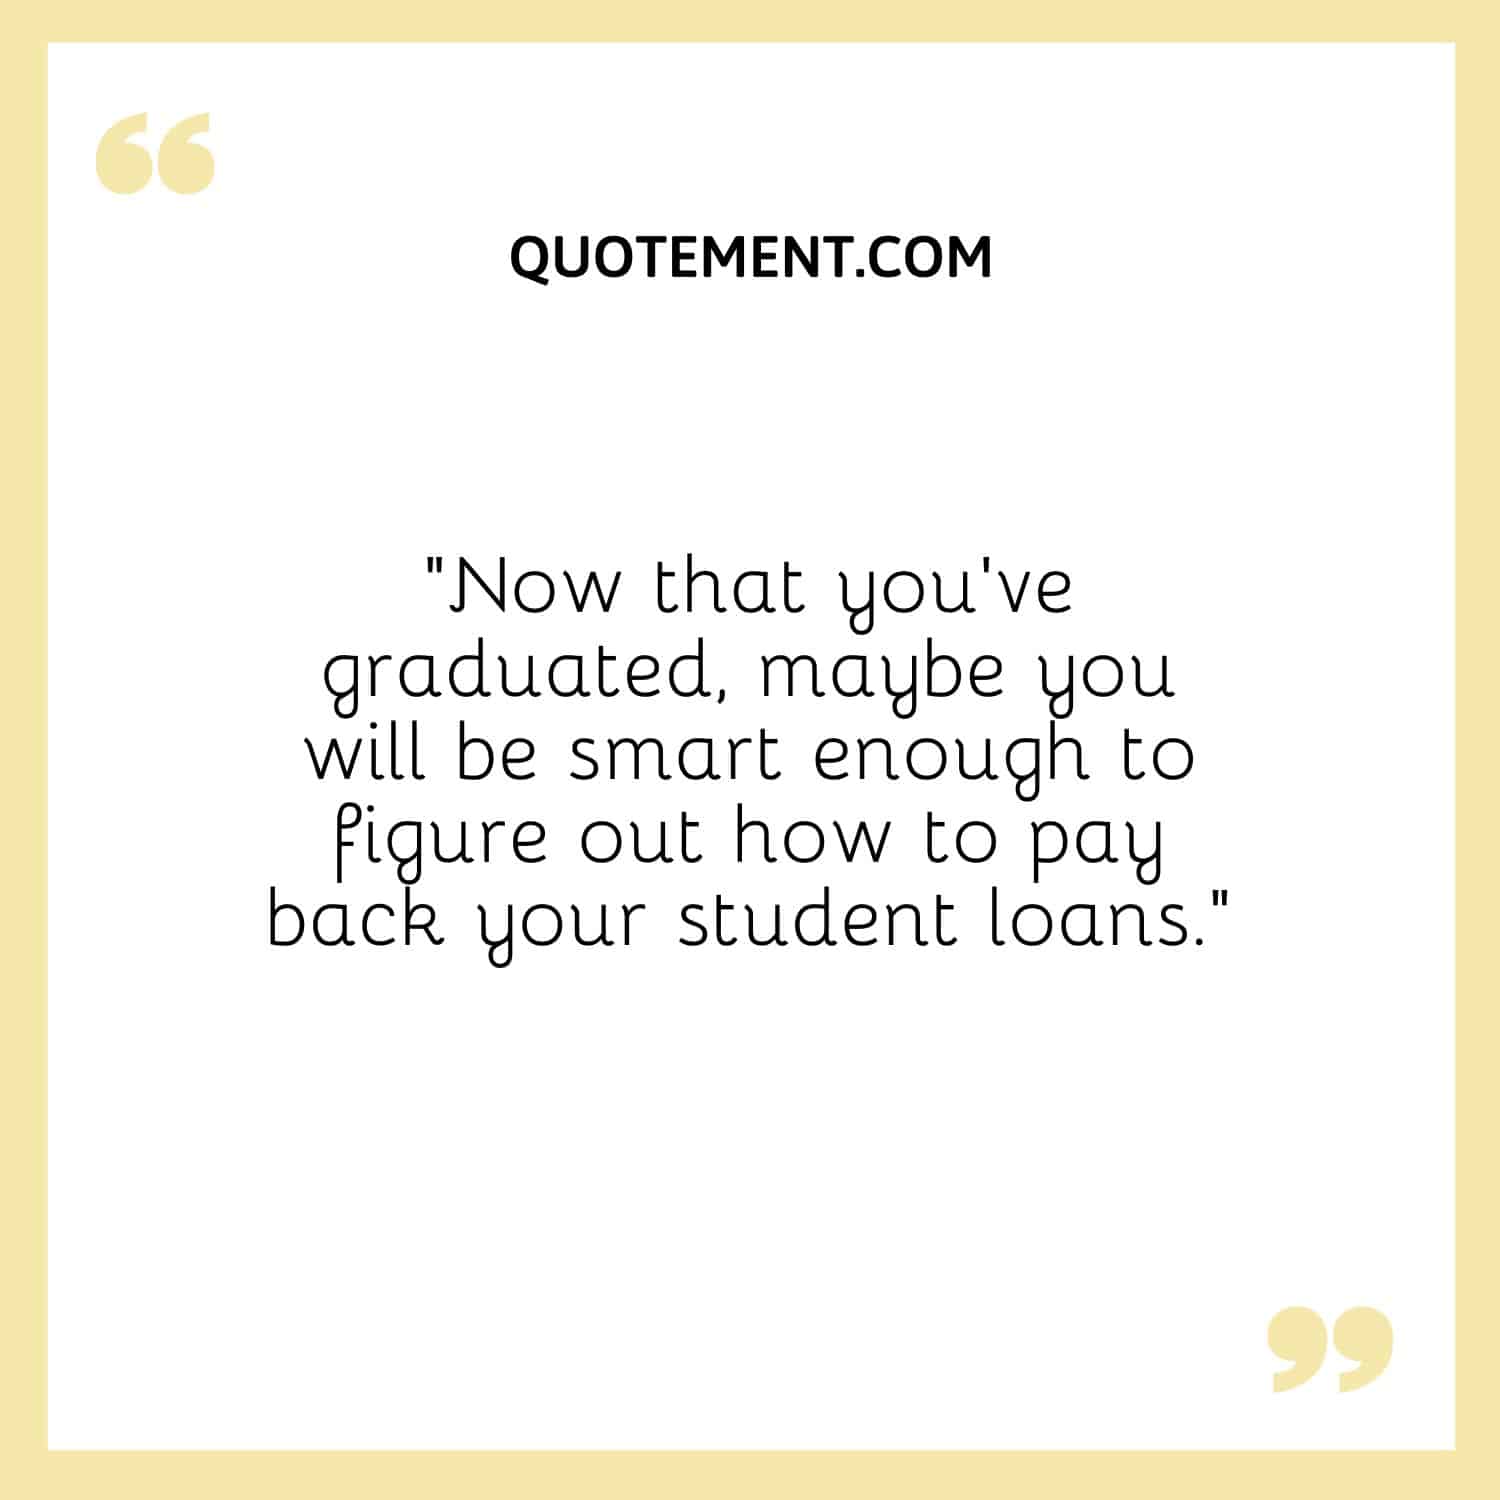 “Now that you’ve graduated, maybe you will be smart enough to figure out how to pay back your student loans.”